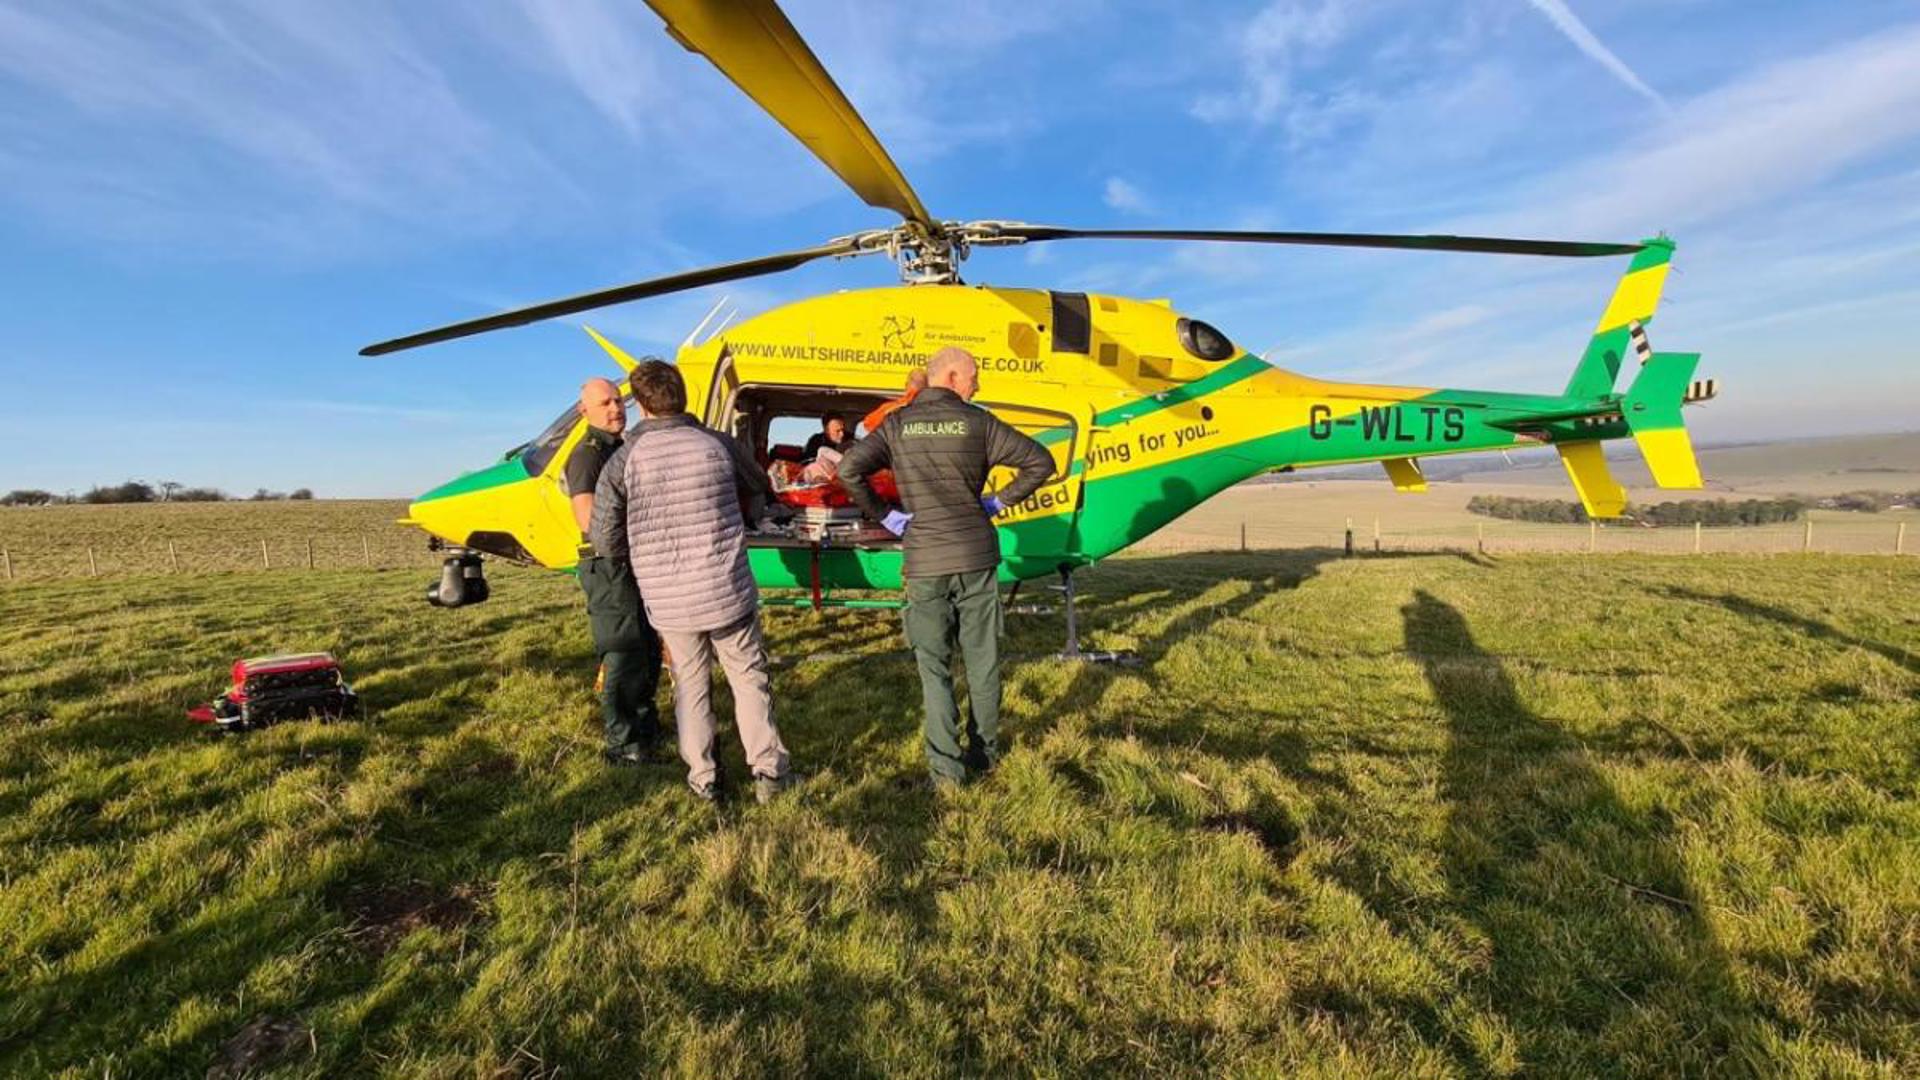 Wiltshire Air Ambulance's helicopter in a field, loading a patient on board